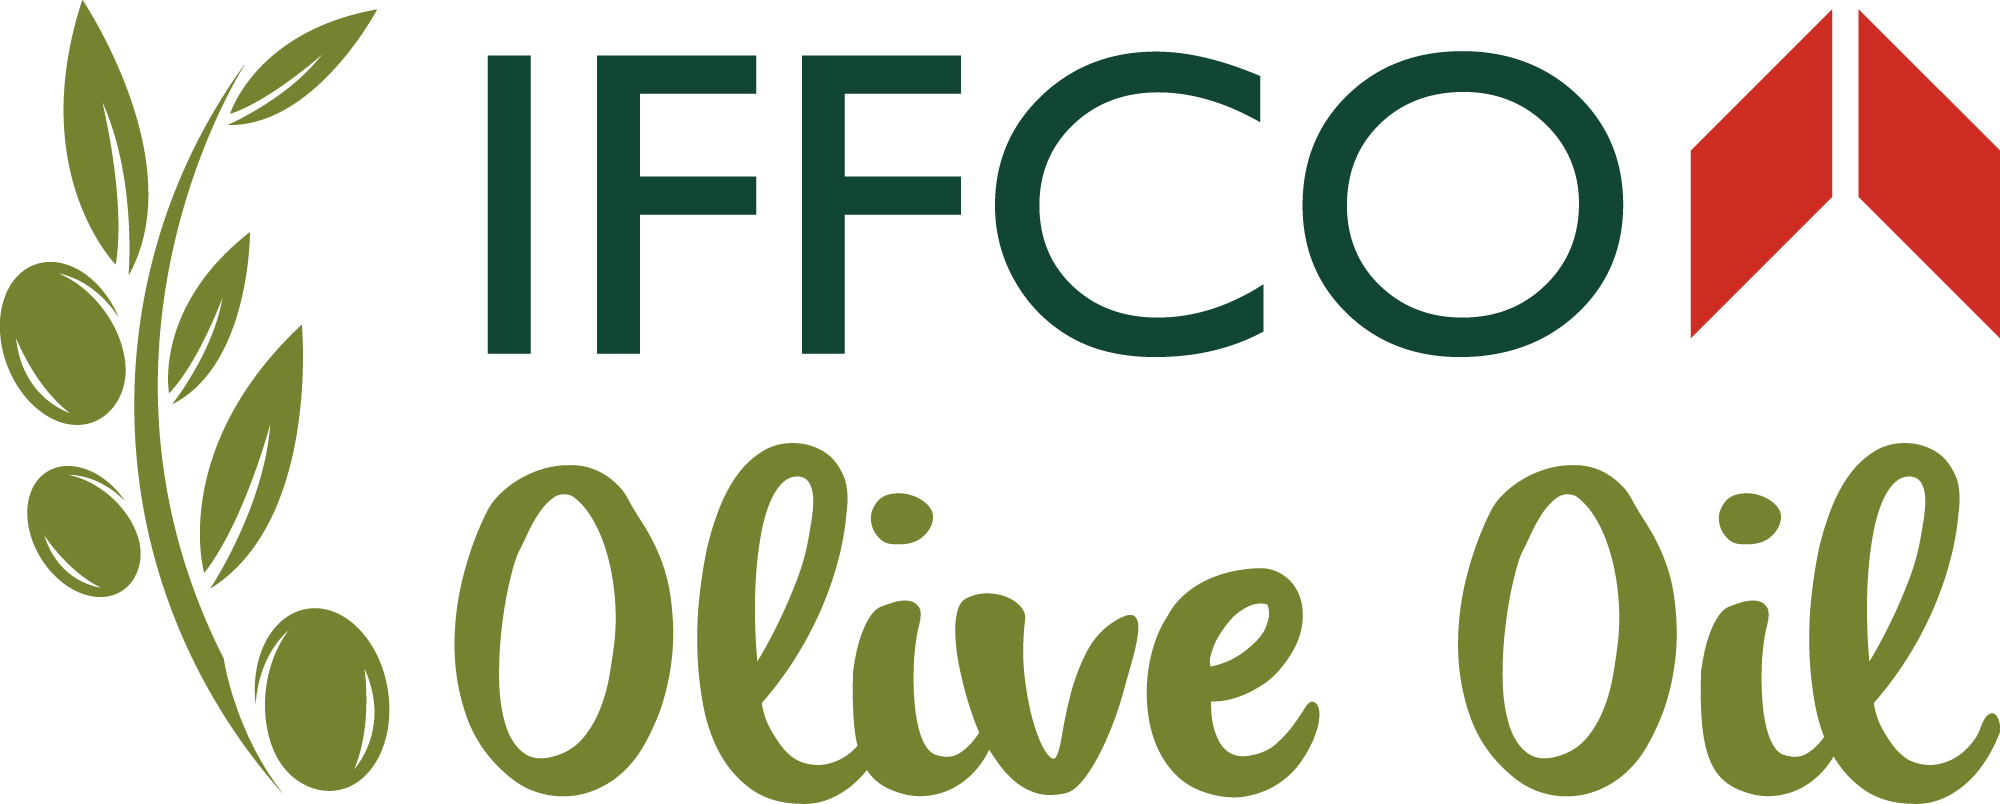 IFFCO Olive Oil